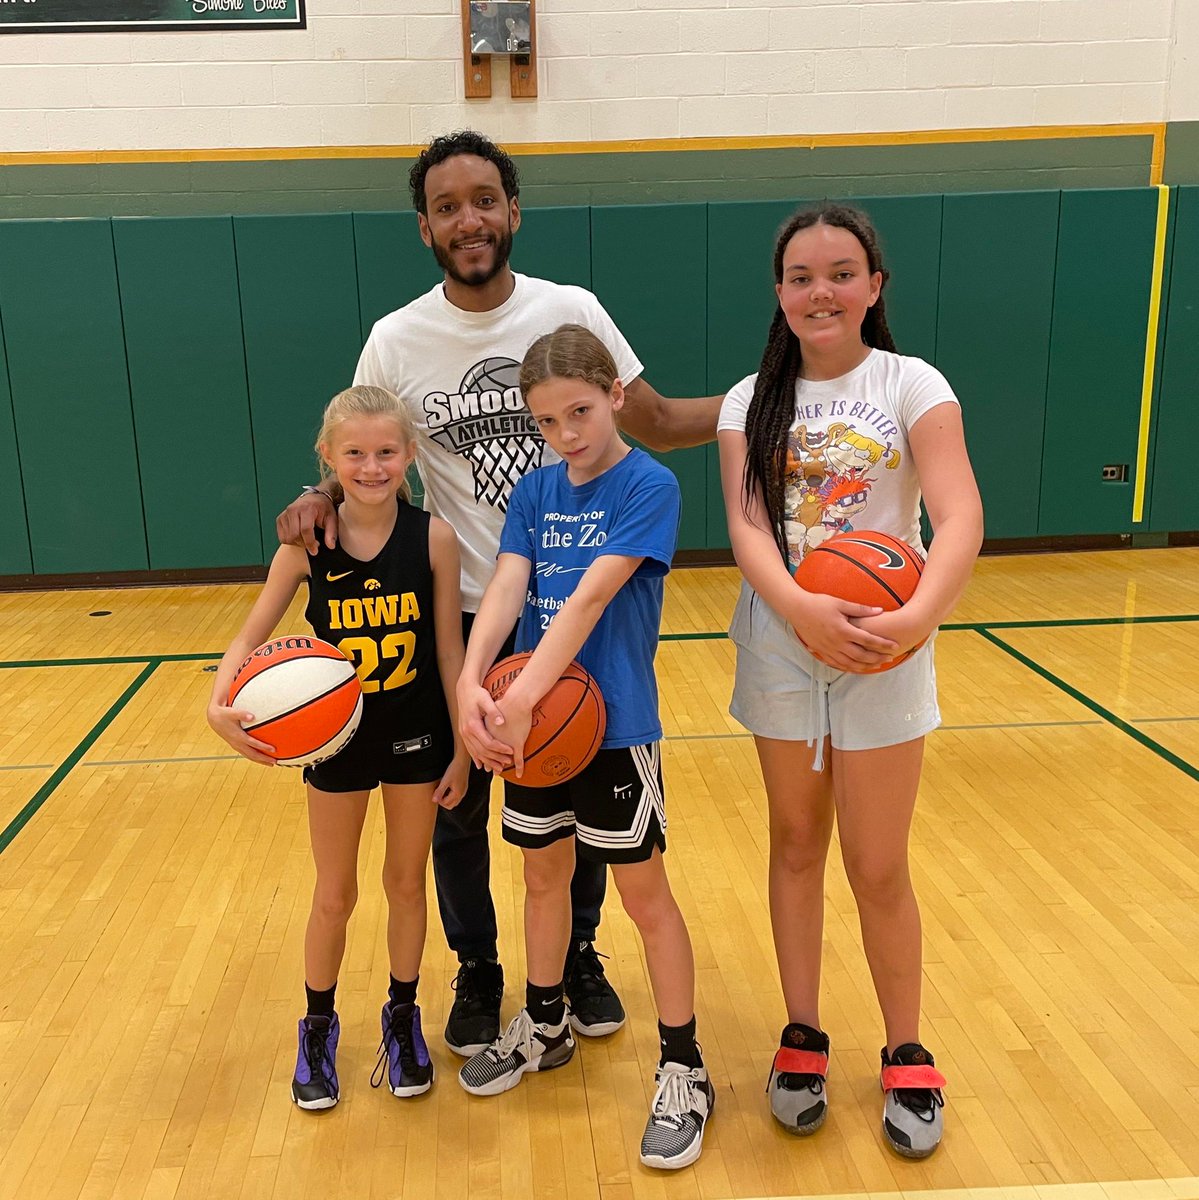 Avery, Aurora, & Hailey have been regulars on the hardwood this spring! Here they are after their latest workout with Jordan! Keep up the great work ladies!
.
.
.
#basketballtraining #basketballdrills #basketballtips #girlsbasketball #youthbasketball #aaubasketball #basketball